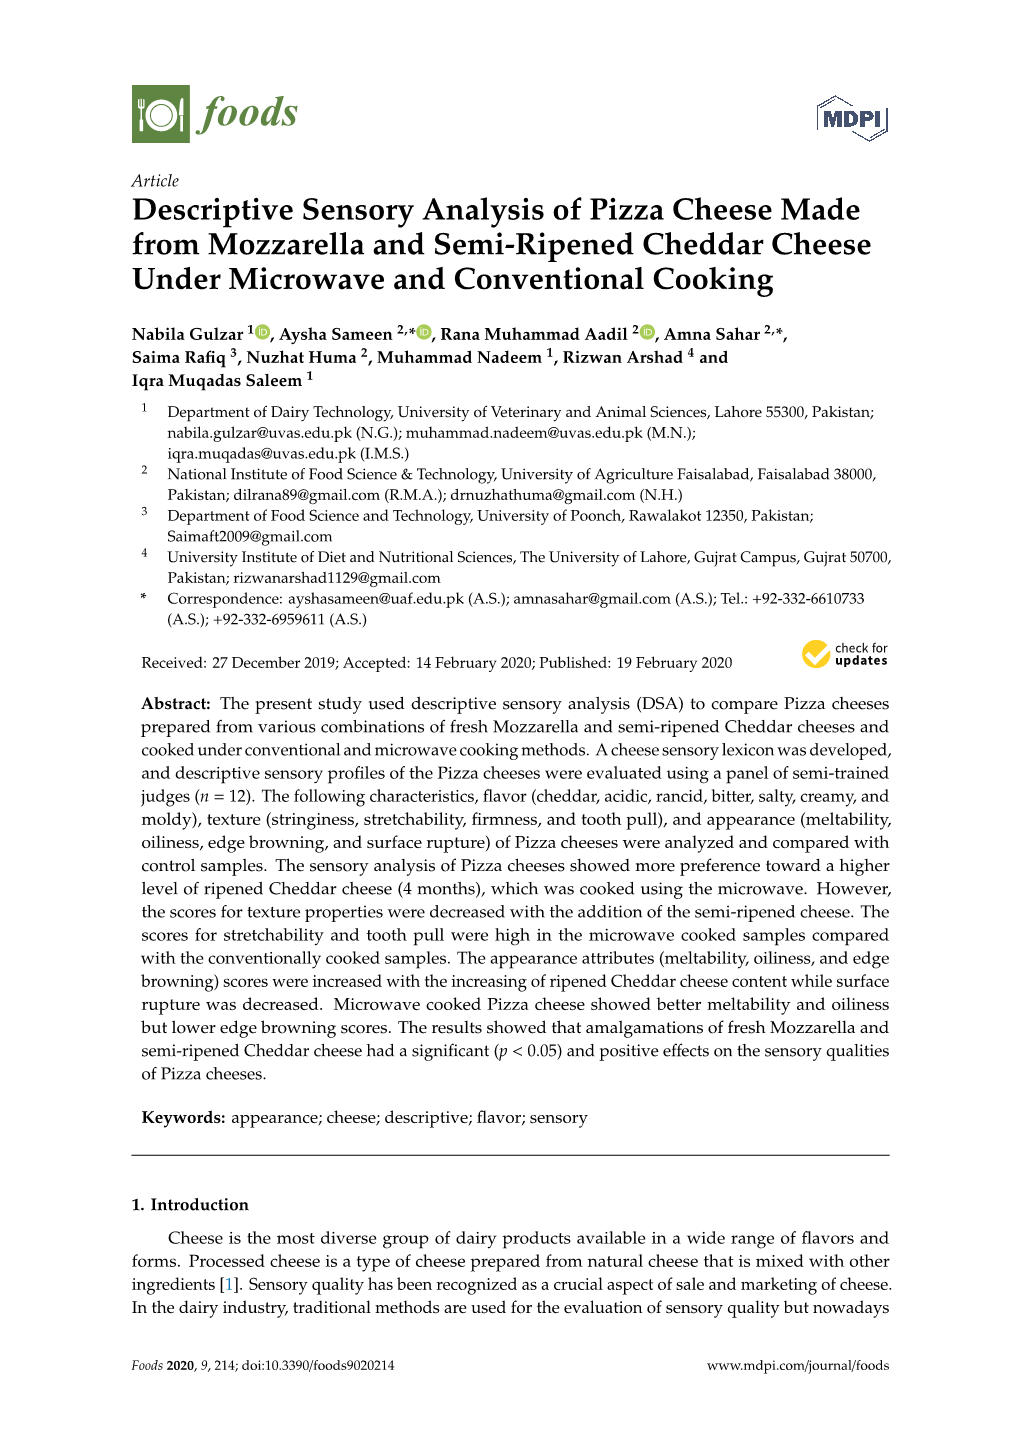 Descriptive Sensory Analysis of Pizza Cheese Made from Mozzarella and Semi-Ripened Cheddar Cheese Under Microwave and Conventional Cooking